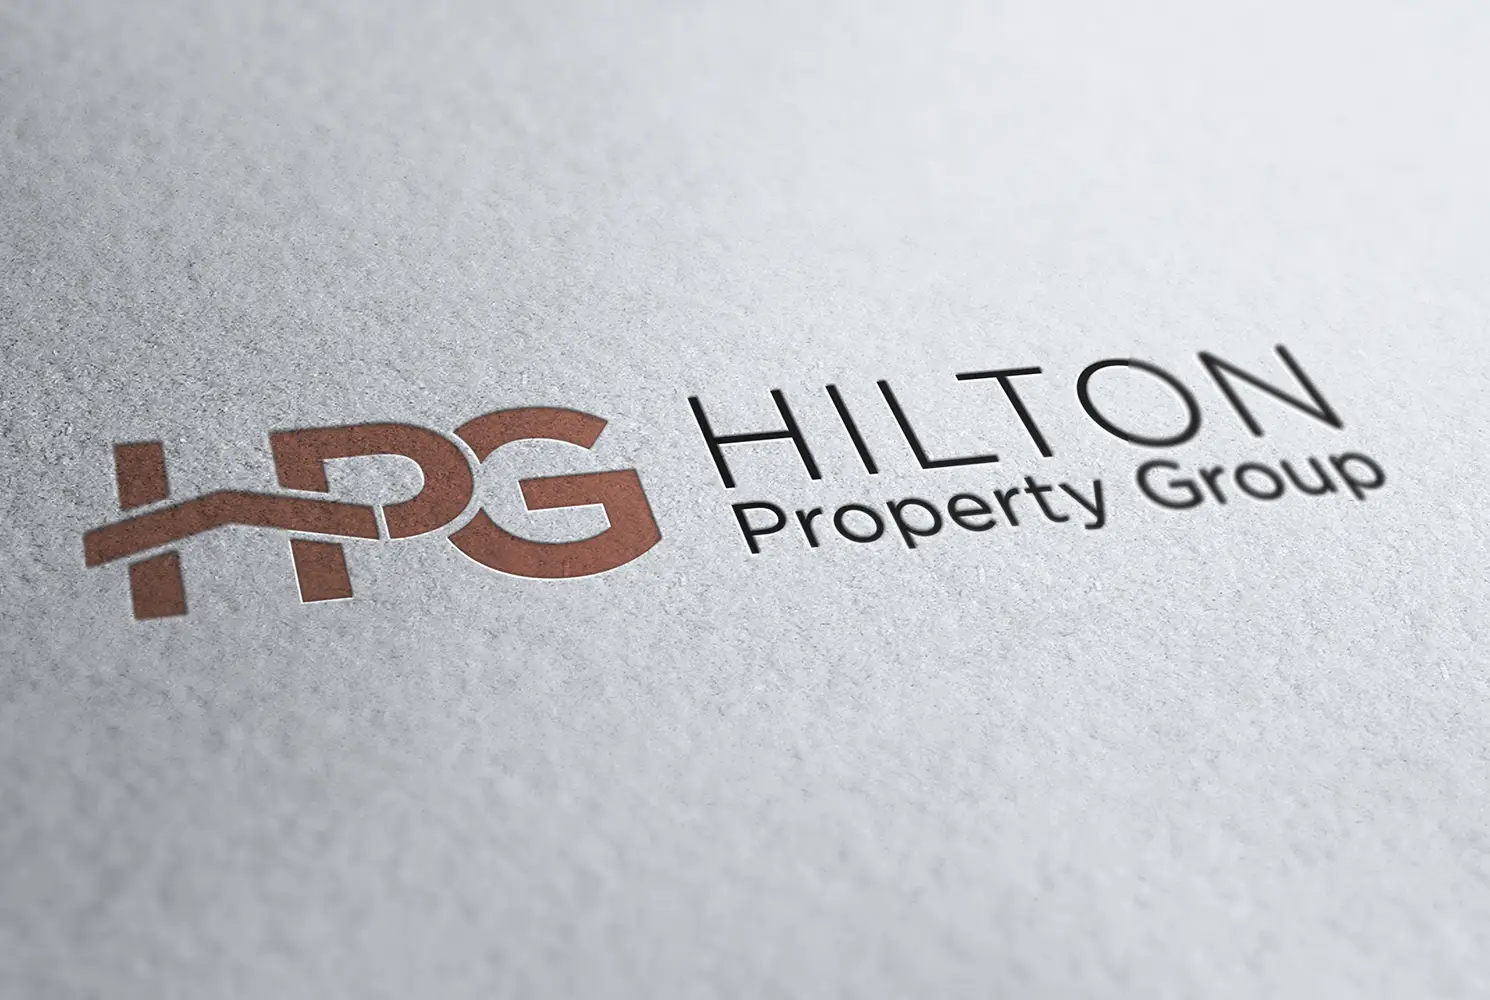 Mock up of the Hilton Property Group logo printed on uncoated paper